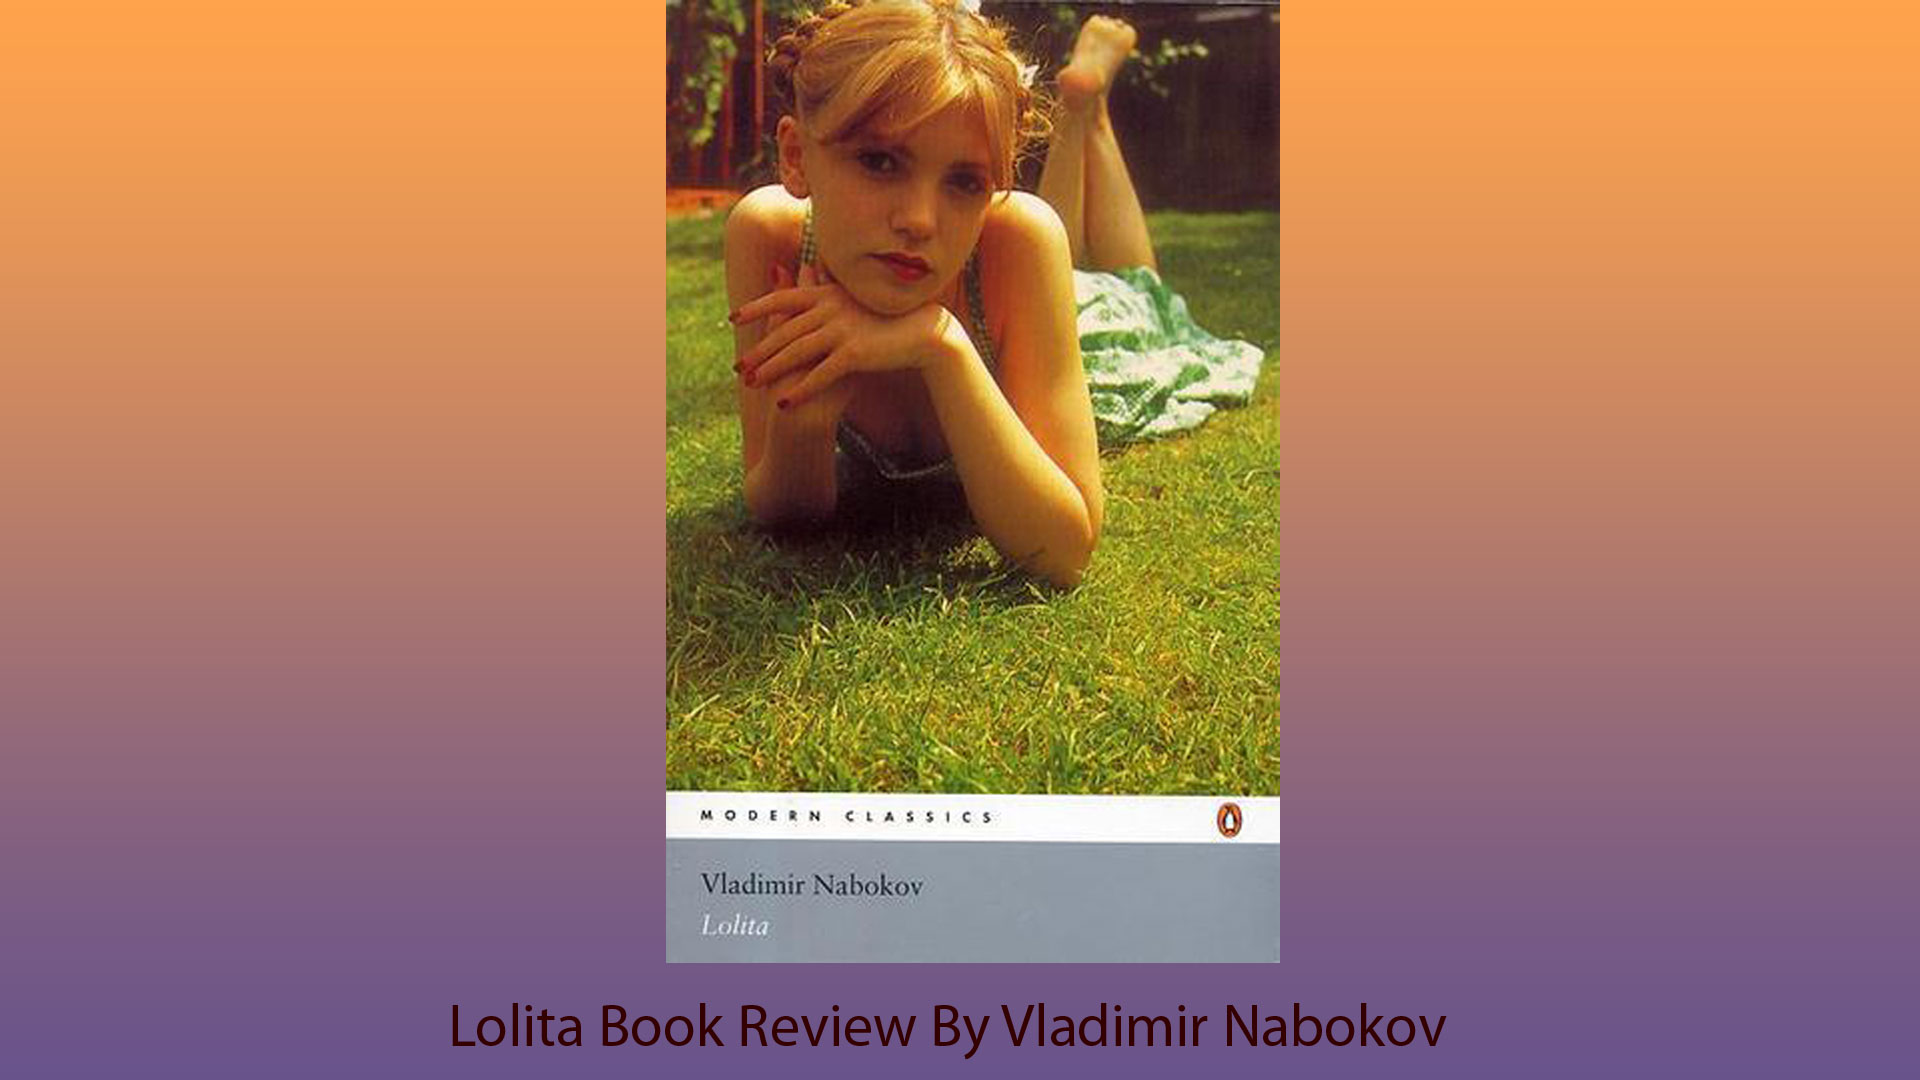 Lolita Book Review Cover Image